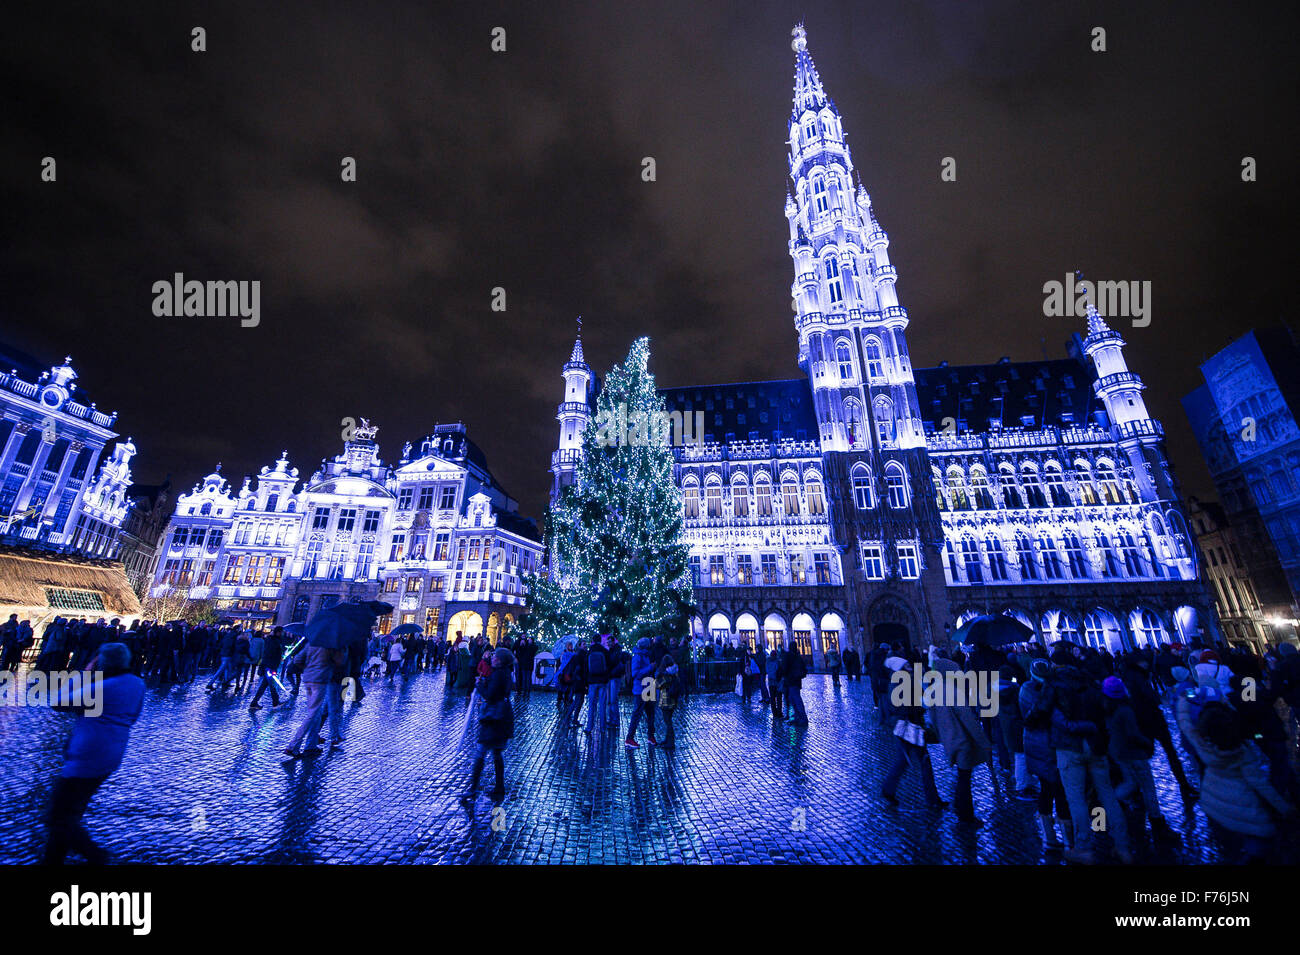 File) Christmas lights show at the Grand Place in Brussels, Belgium on  12.12.2014 The City of Brussels on Thursday 26.11.2015 will announce  whether or not the annual event Winter Wonders will start